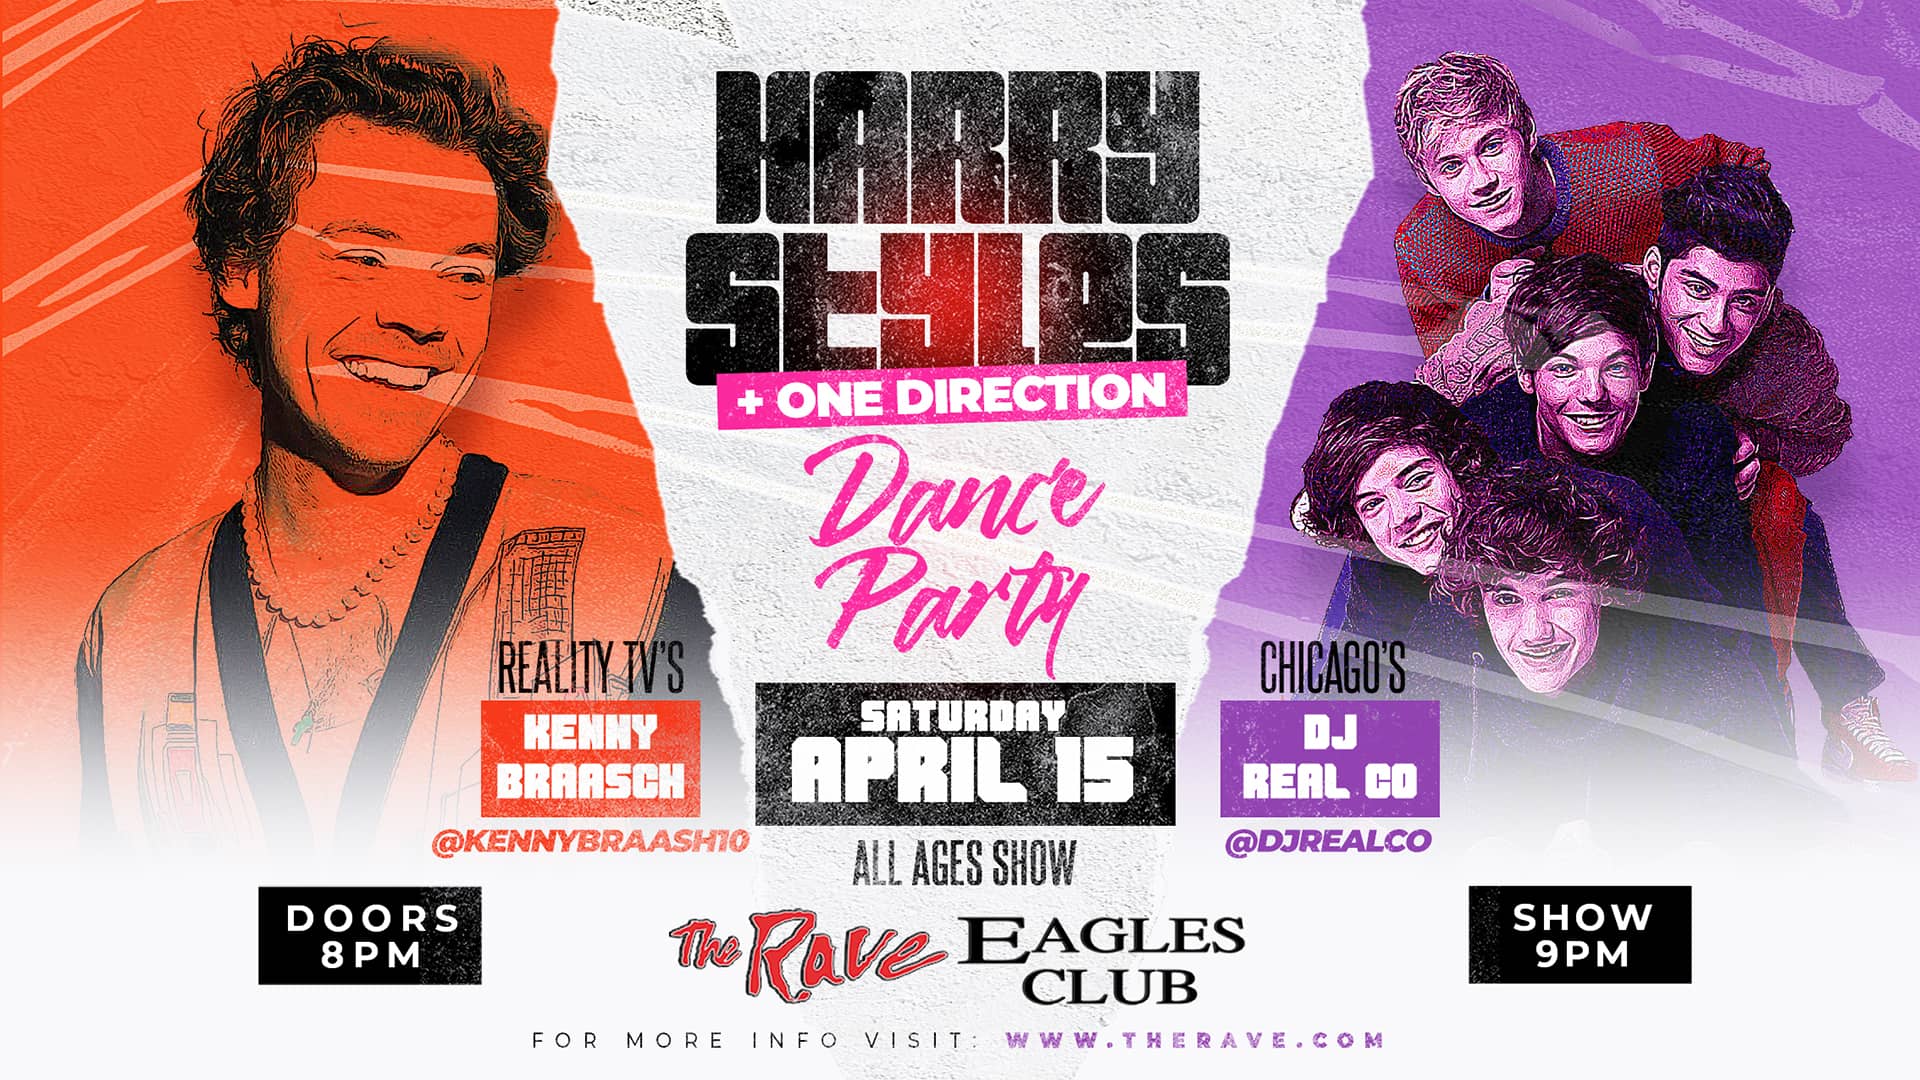 Poster for the Harry Styles Dance Party on Saturday April 15th at The Rave in Milwaukee, WI.